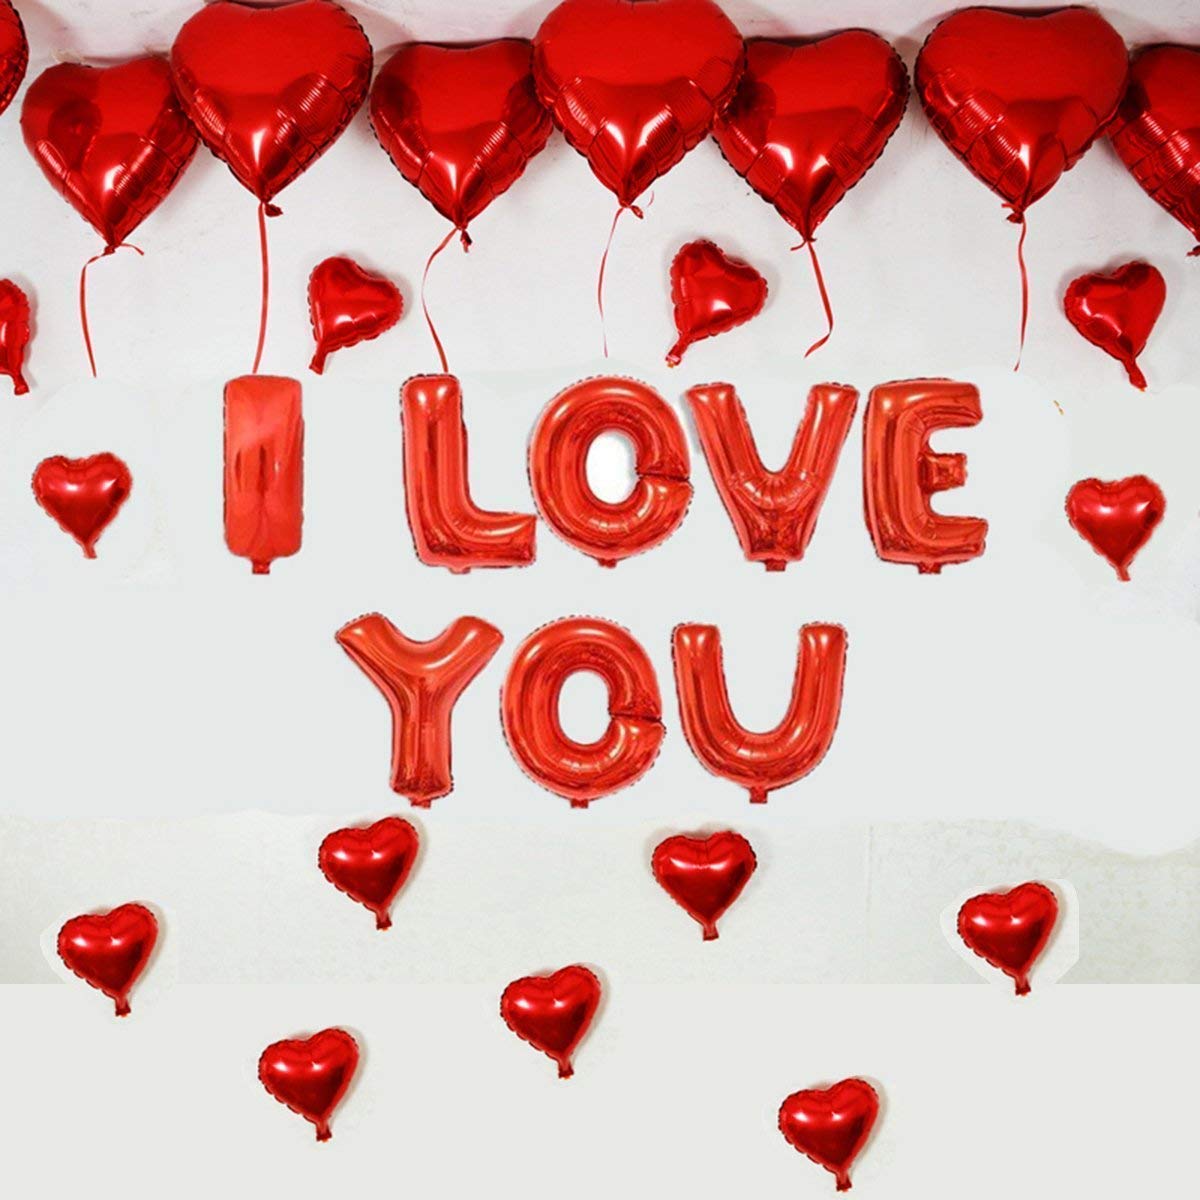 I Love You Foil Balloon 16 Inches Red Letters freeshipping - CherishX Partystore